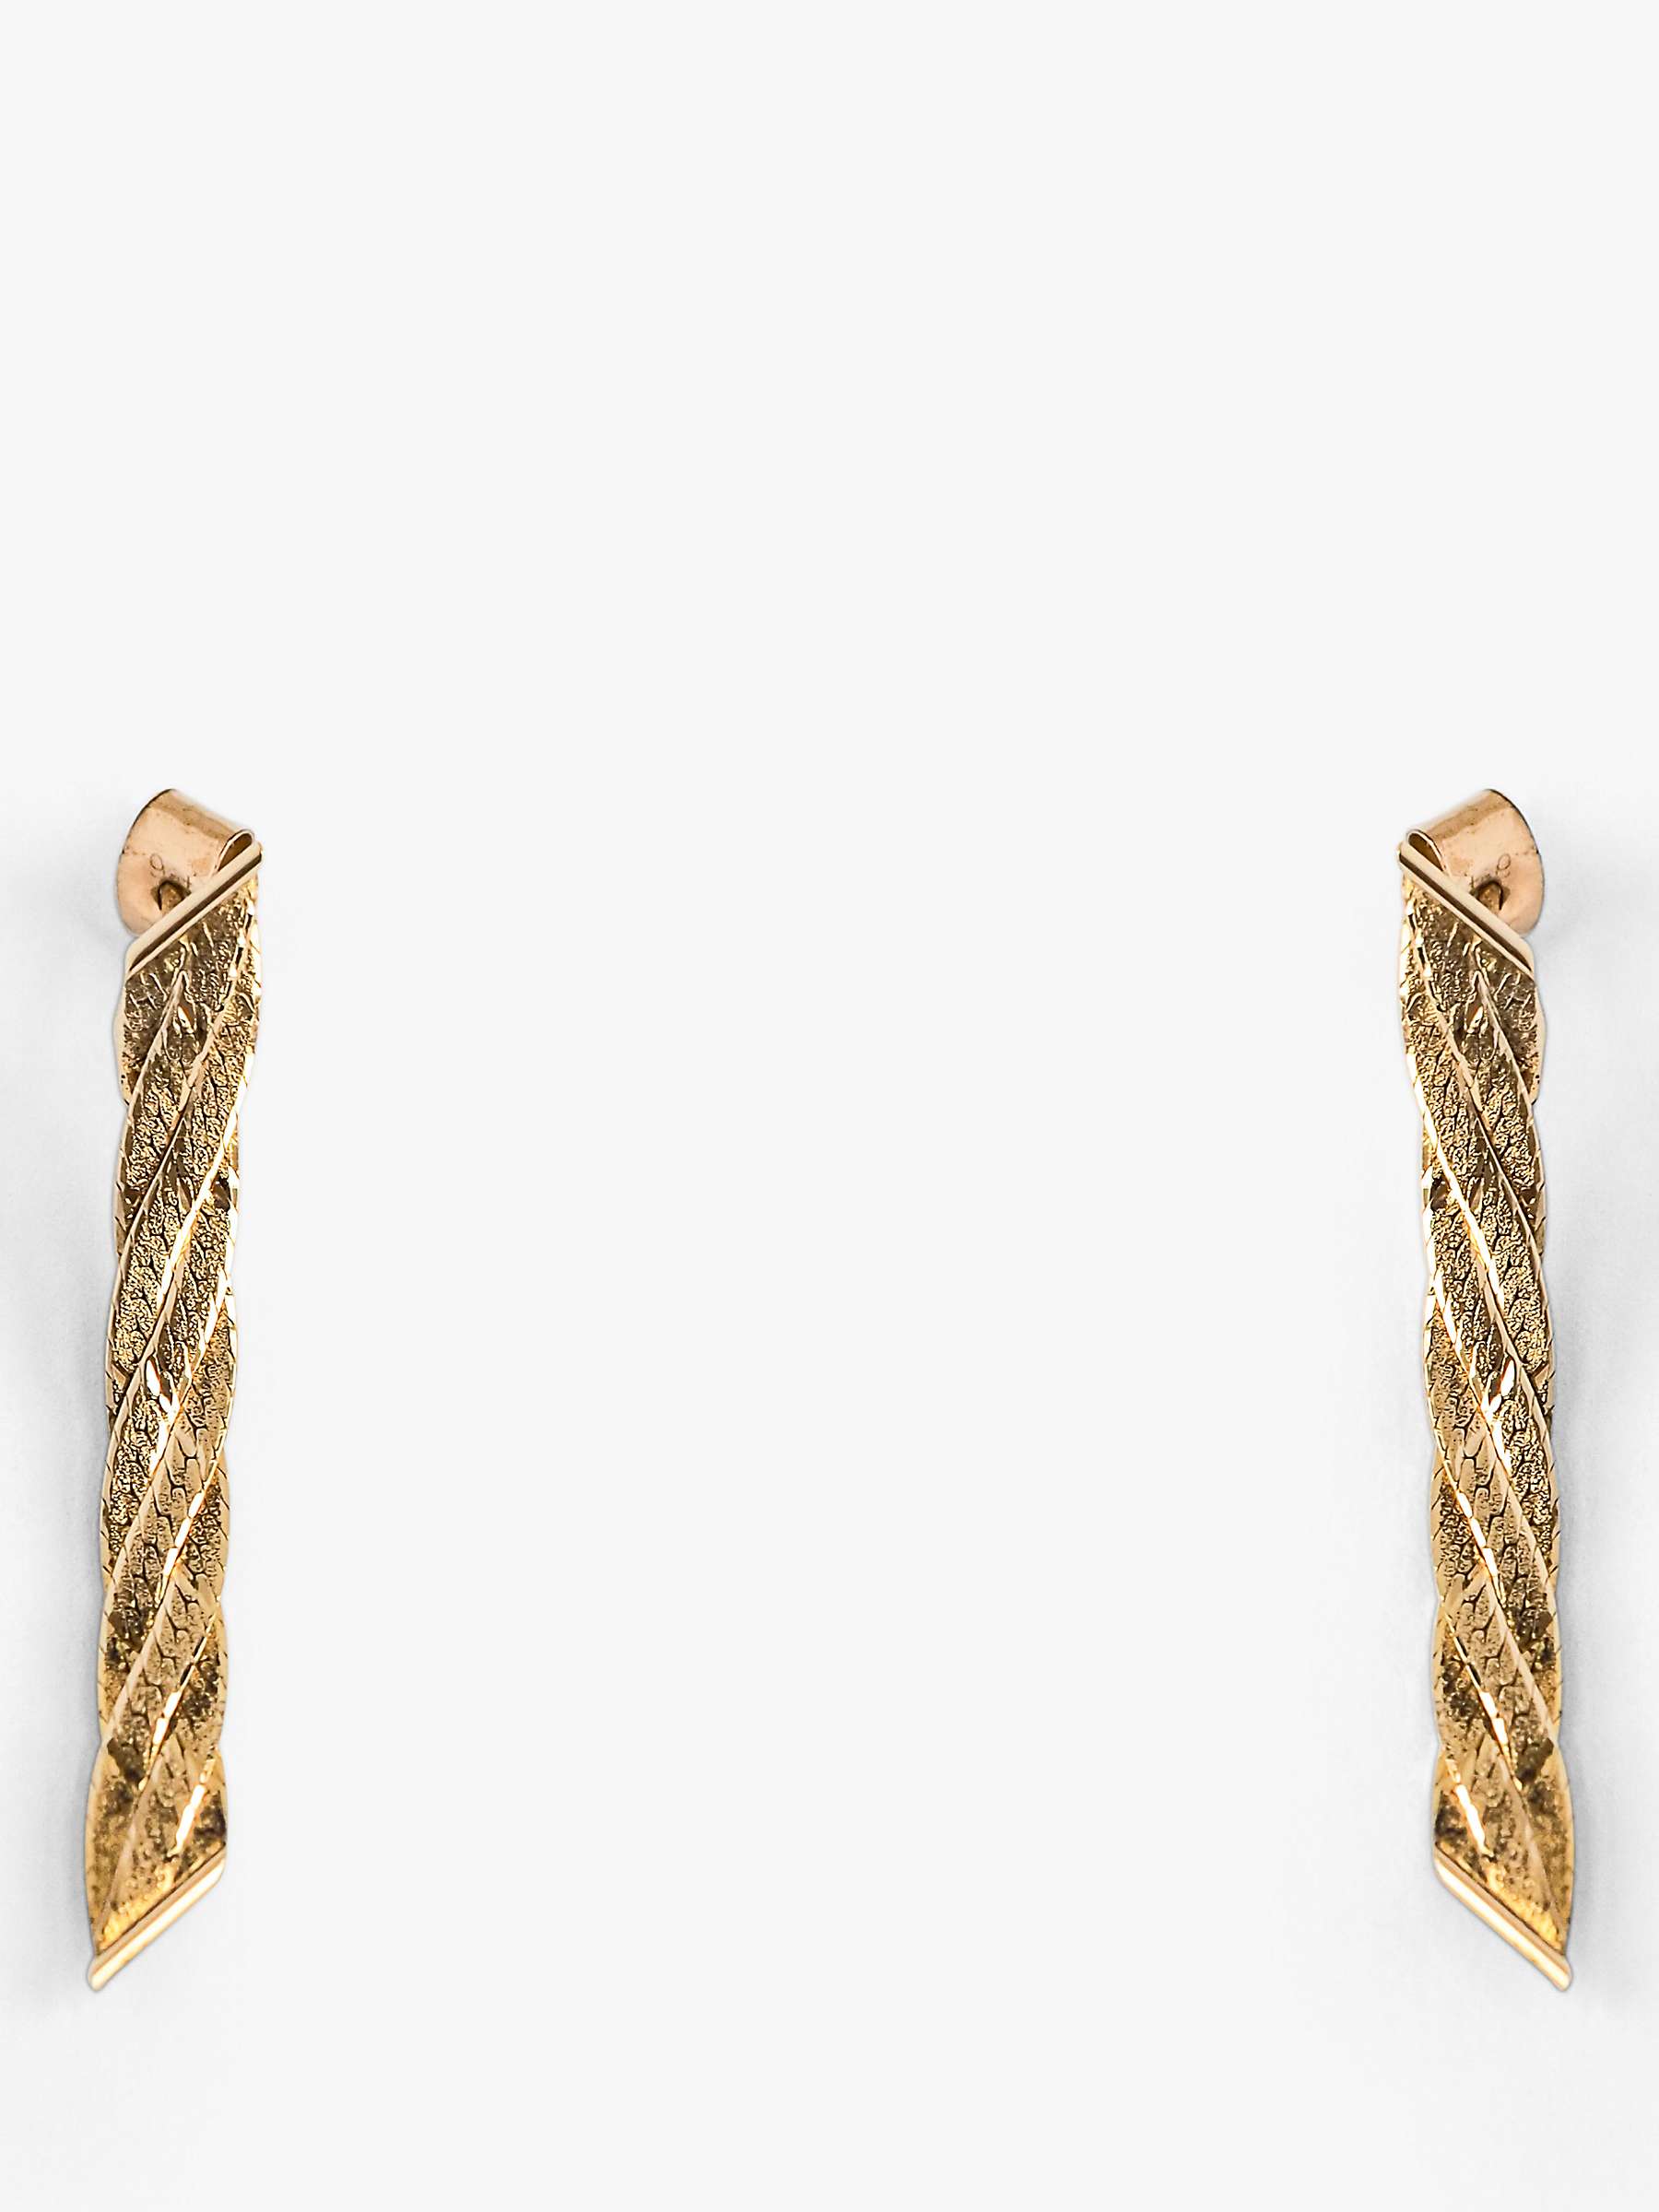 Buy L & T Heirlooms Second Hand 9ct Yellow Gold Plaited Dropper Earrings Online at johnlewis.com